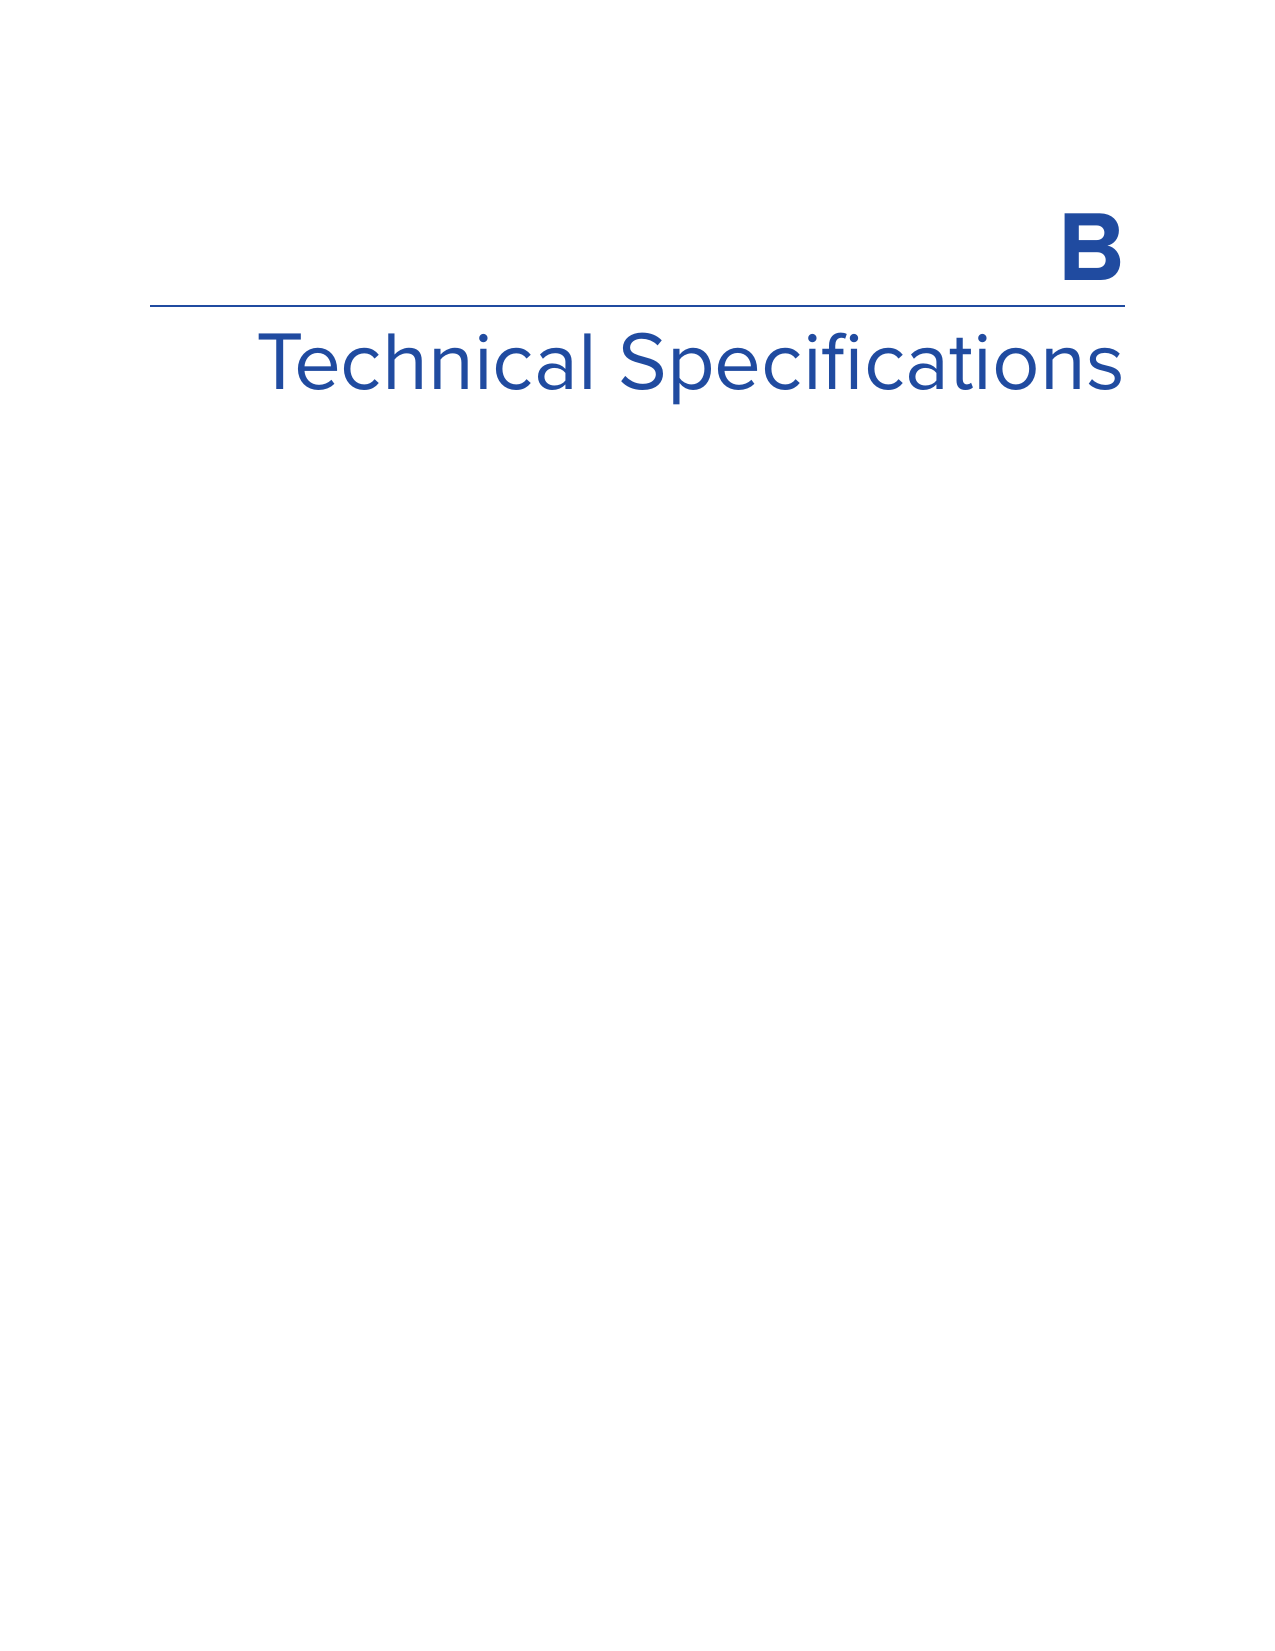 BTechnical Speciﬁcations